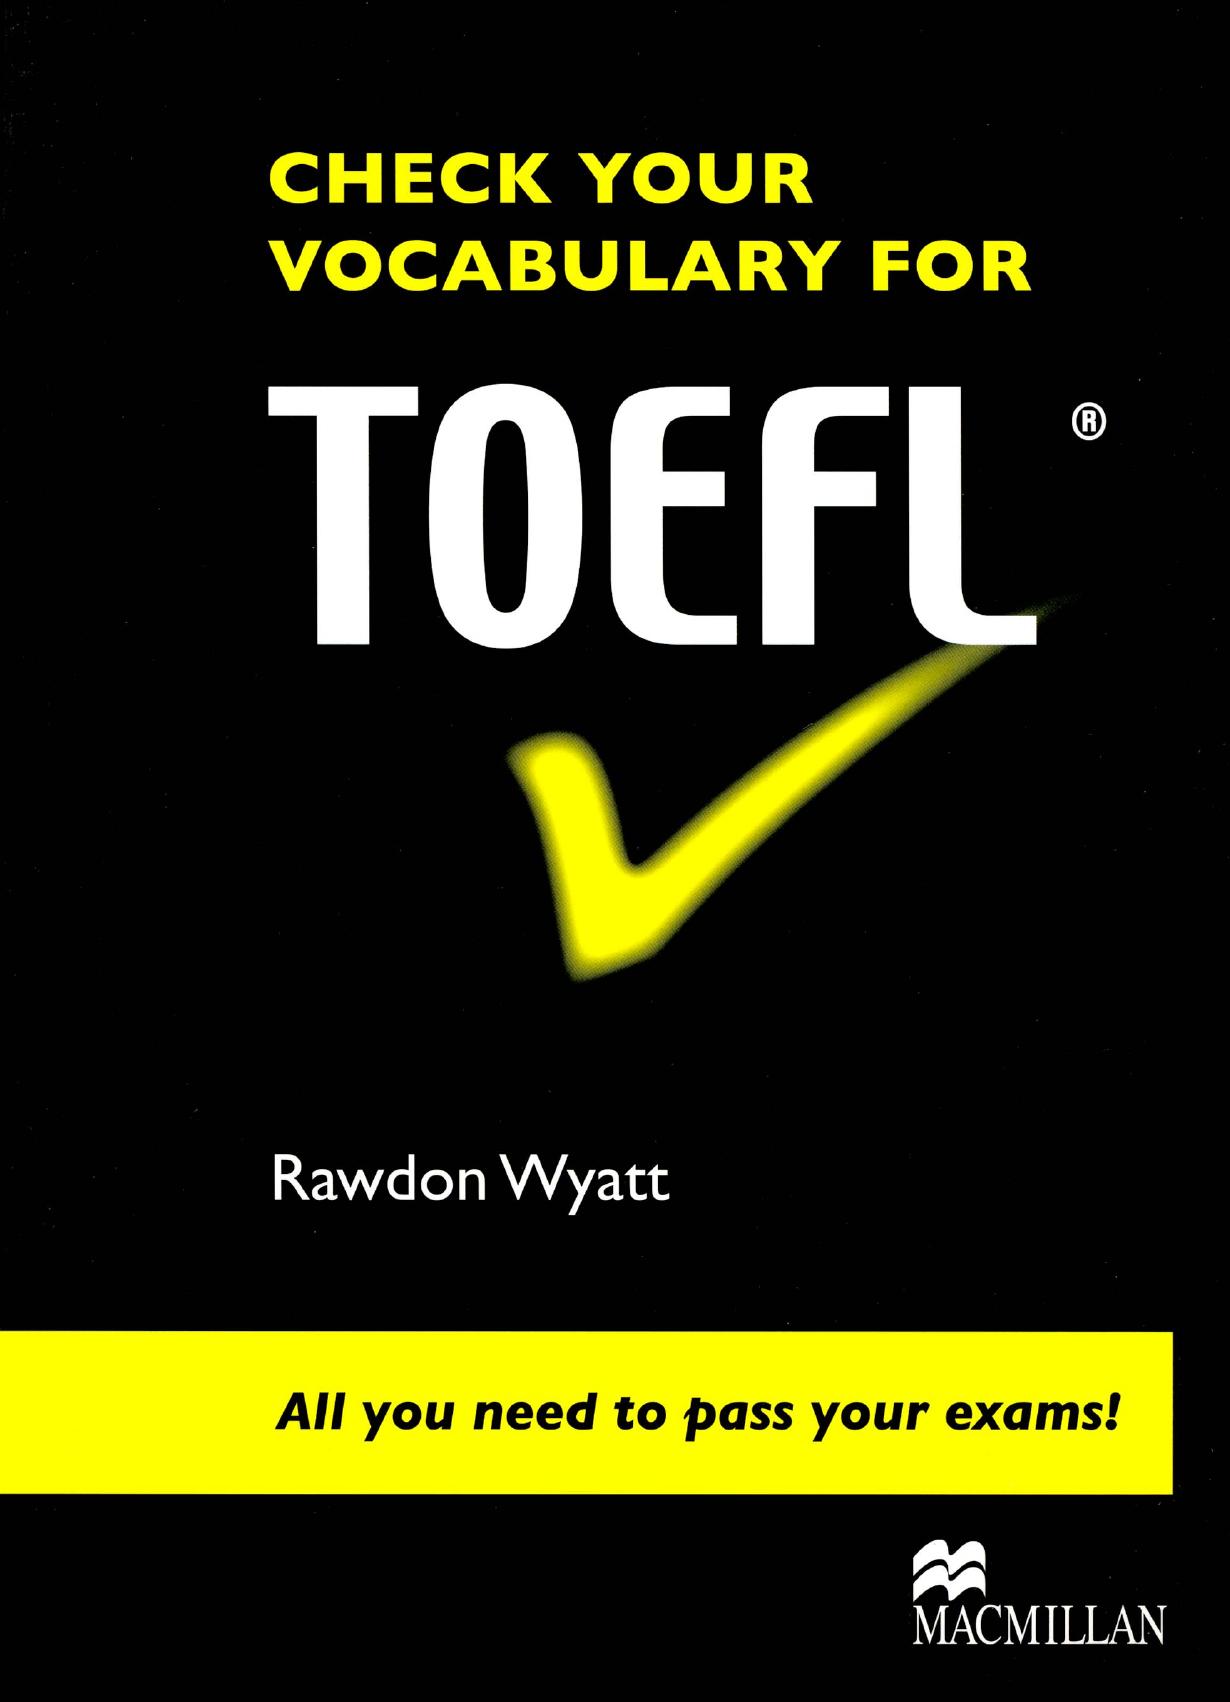 Check your vocabulary for TOEFL all you need to pass your exams! by Rawdon Wyatt